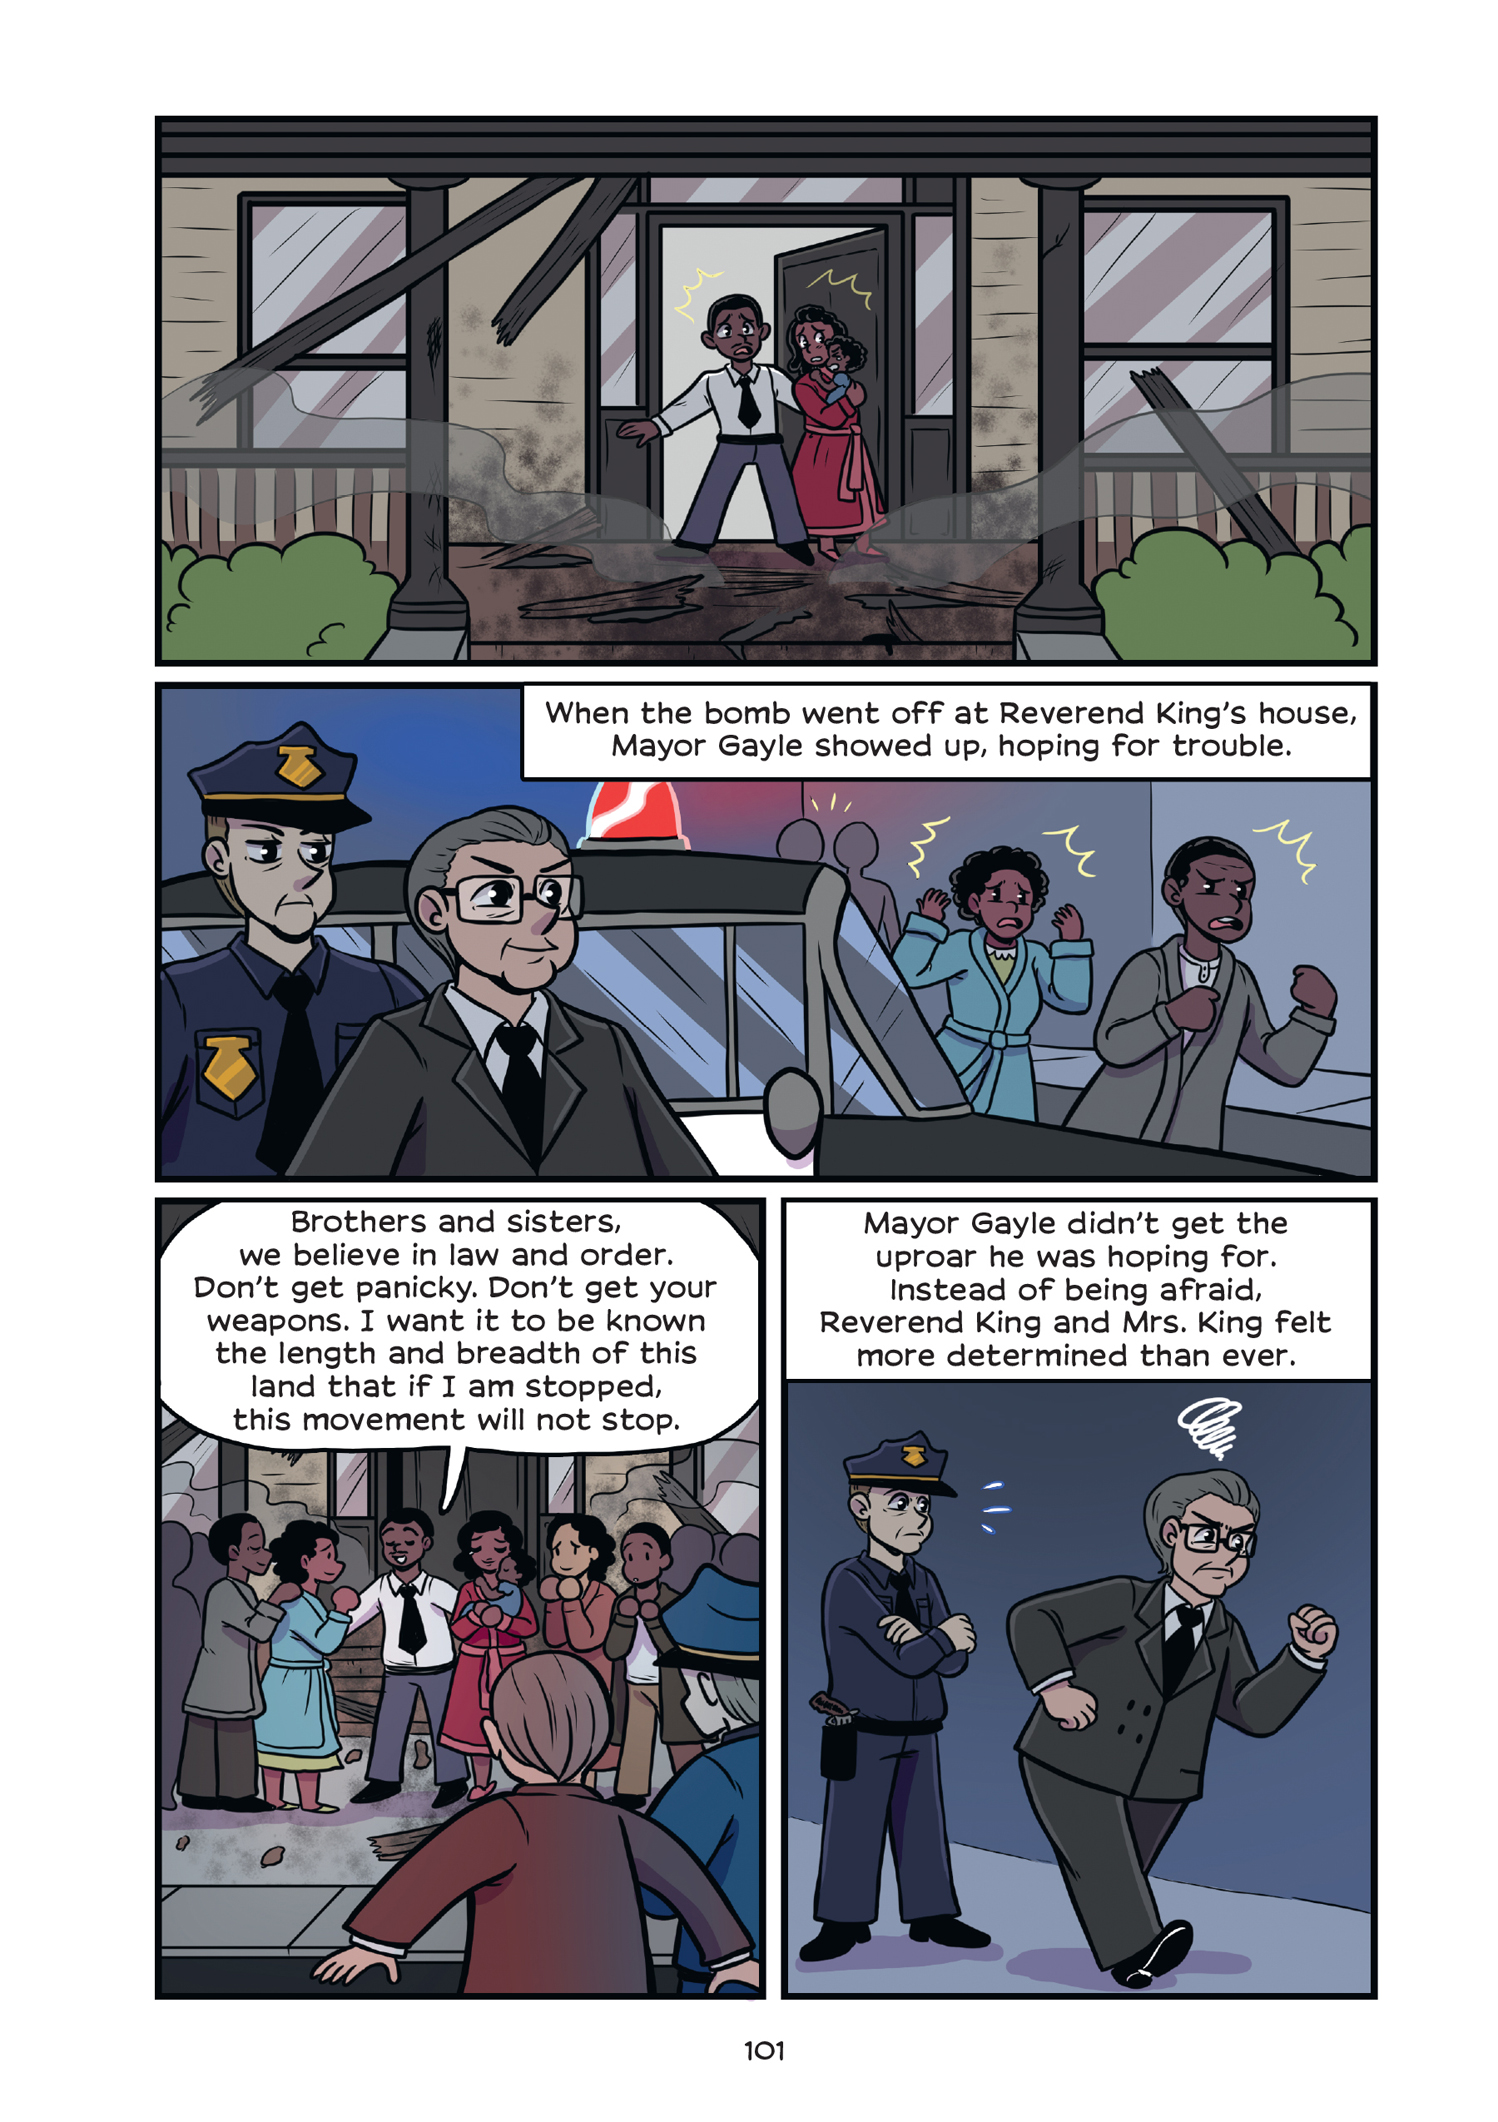 Read online History Comics comic -  Issue # Rosa Parks & Claudette Colvin - Civil Rights Heroes - 106